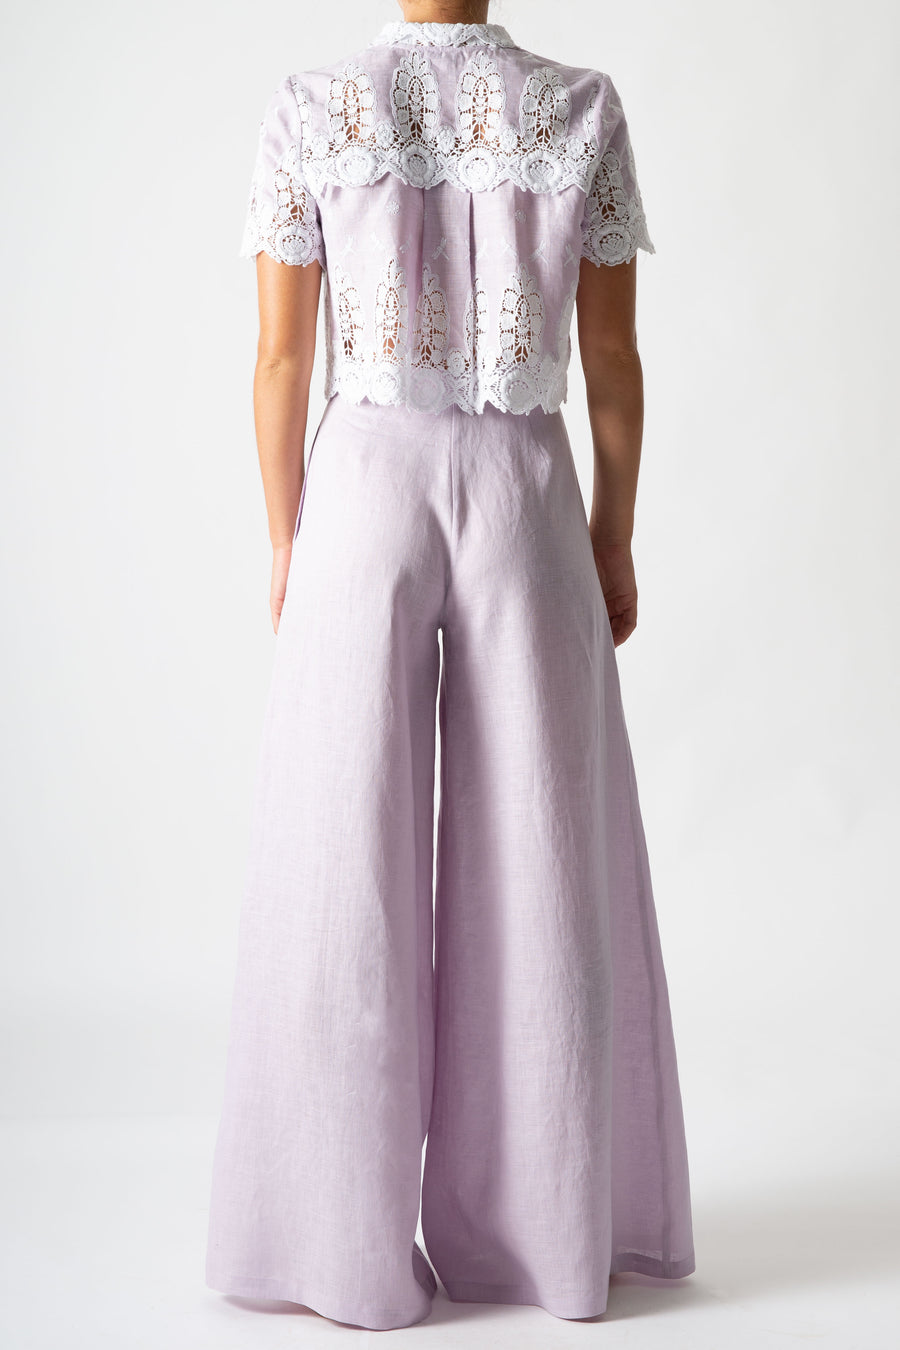 This is a back side photo of a woman wearing a lavander cropped button down with high-waisted lavander pants.